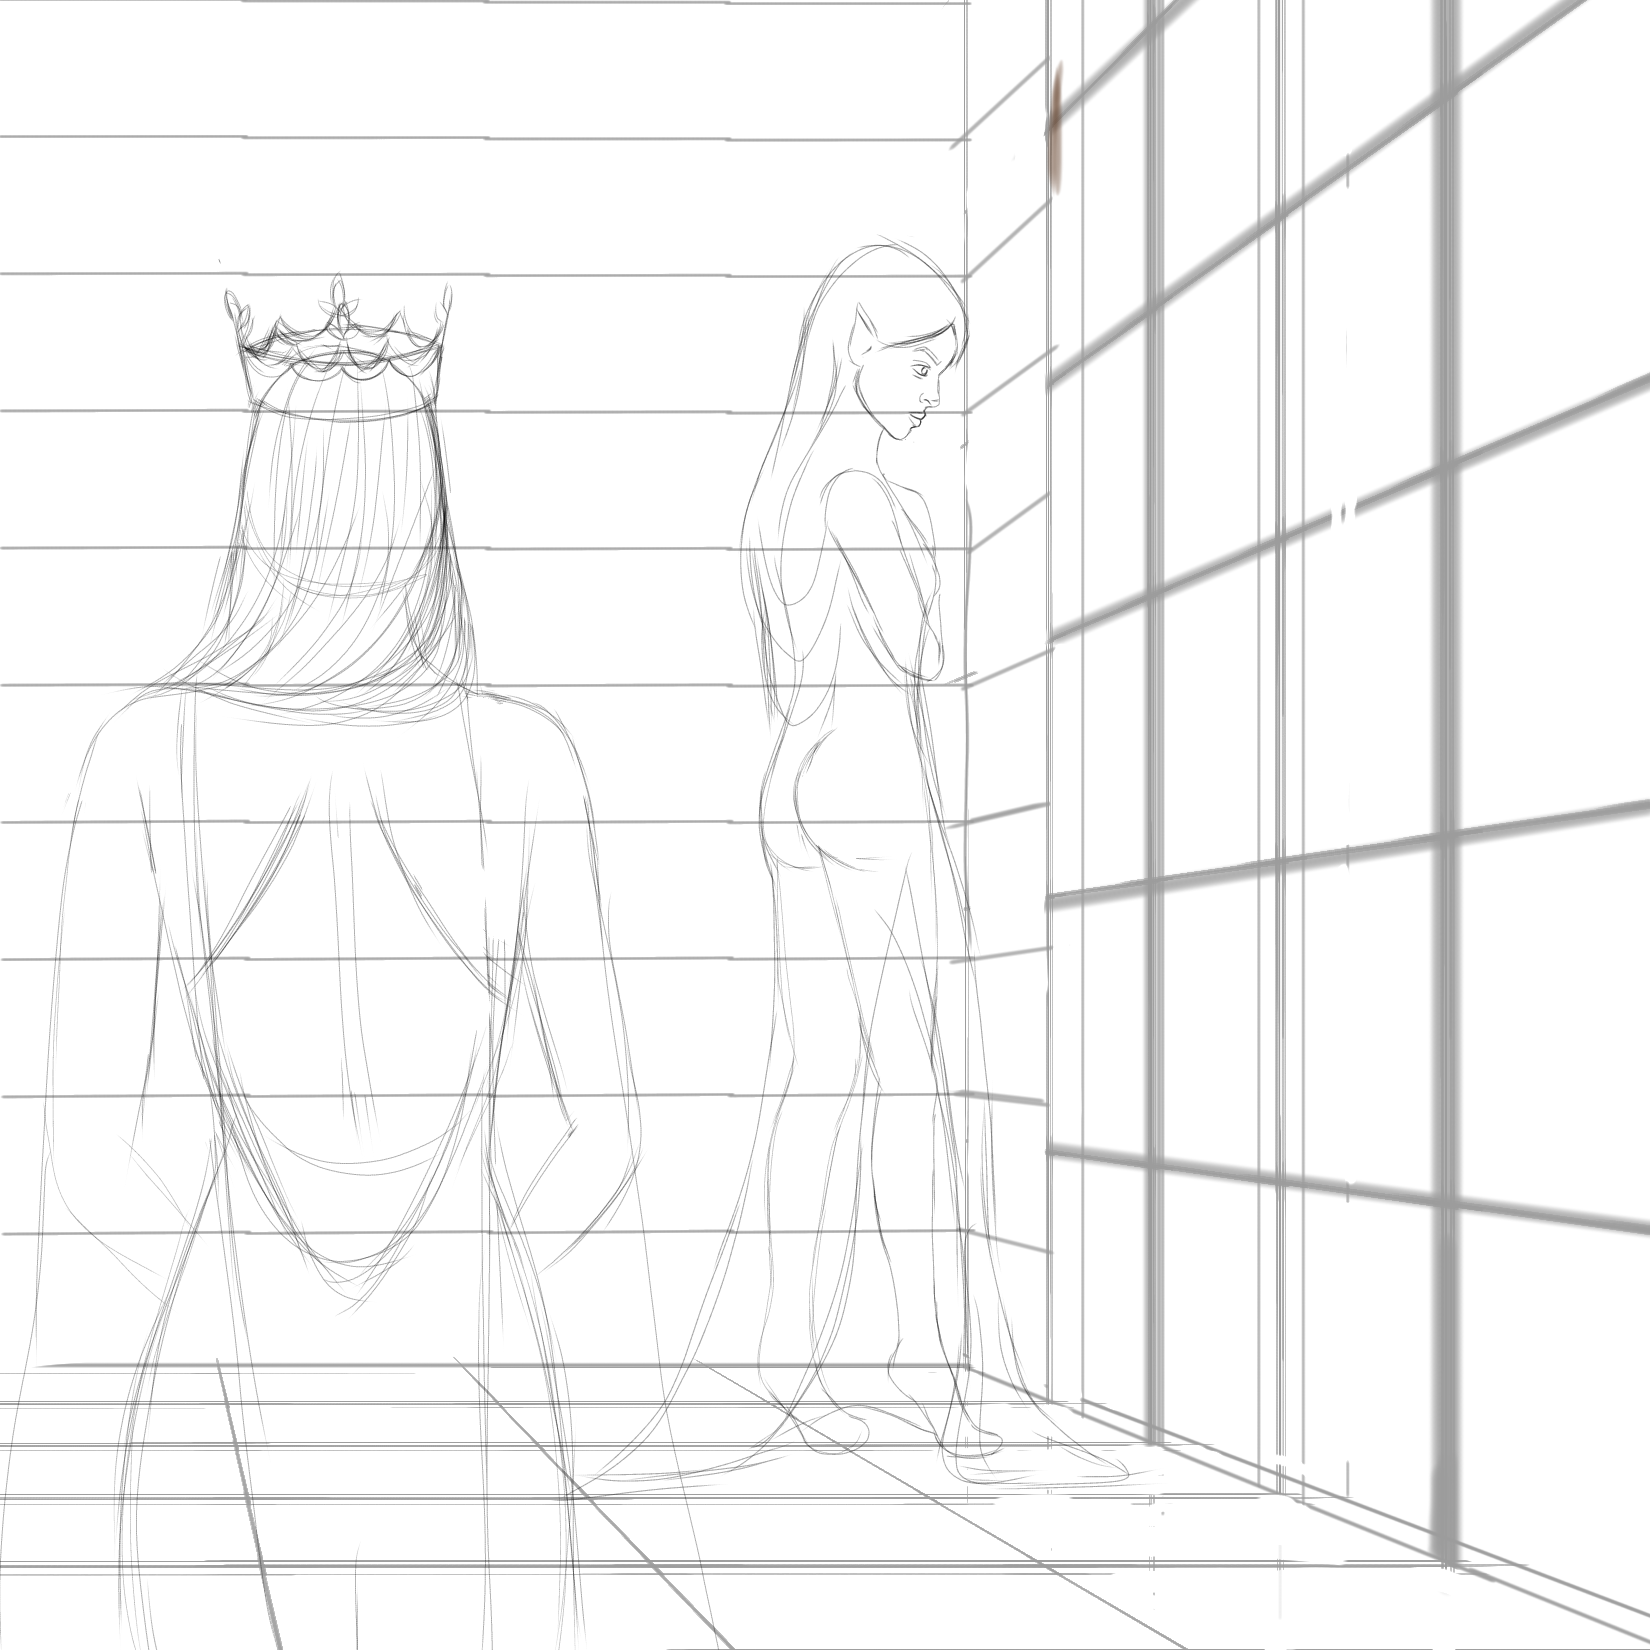 Francisftlp-Digital Drawing-The meeting with the Priestess-Step 1.png